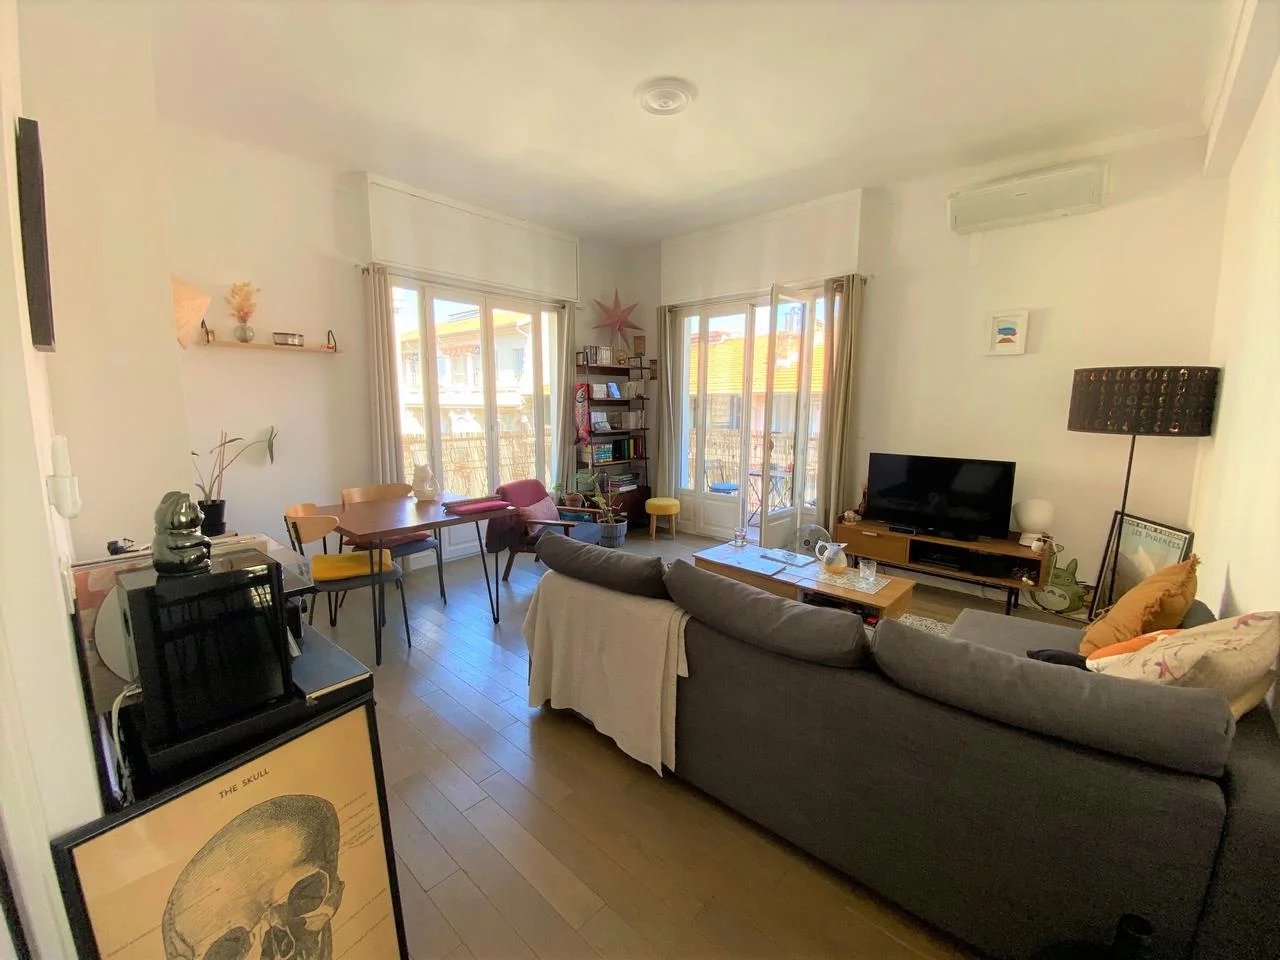 Appartement  2 Rooms 53m2  for sale   389 000 €